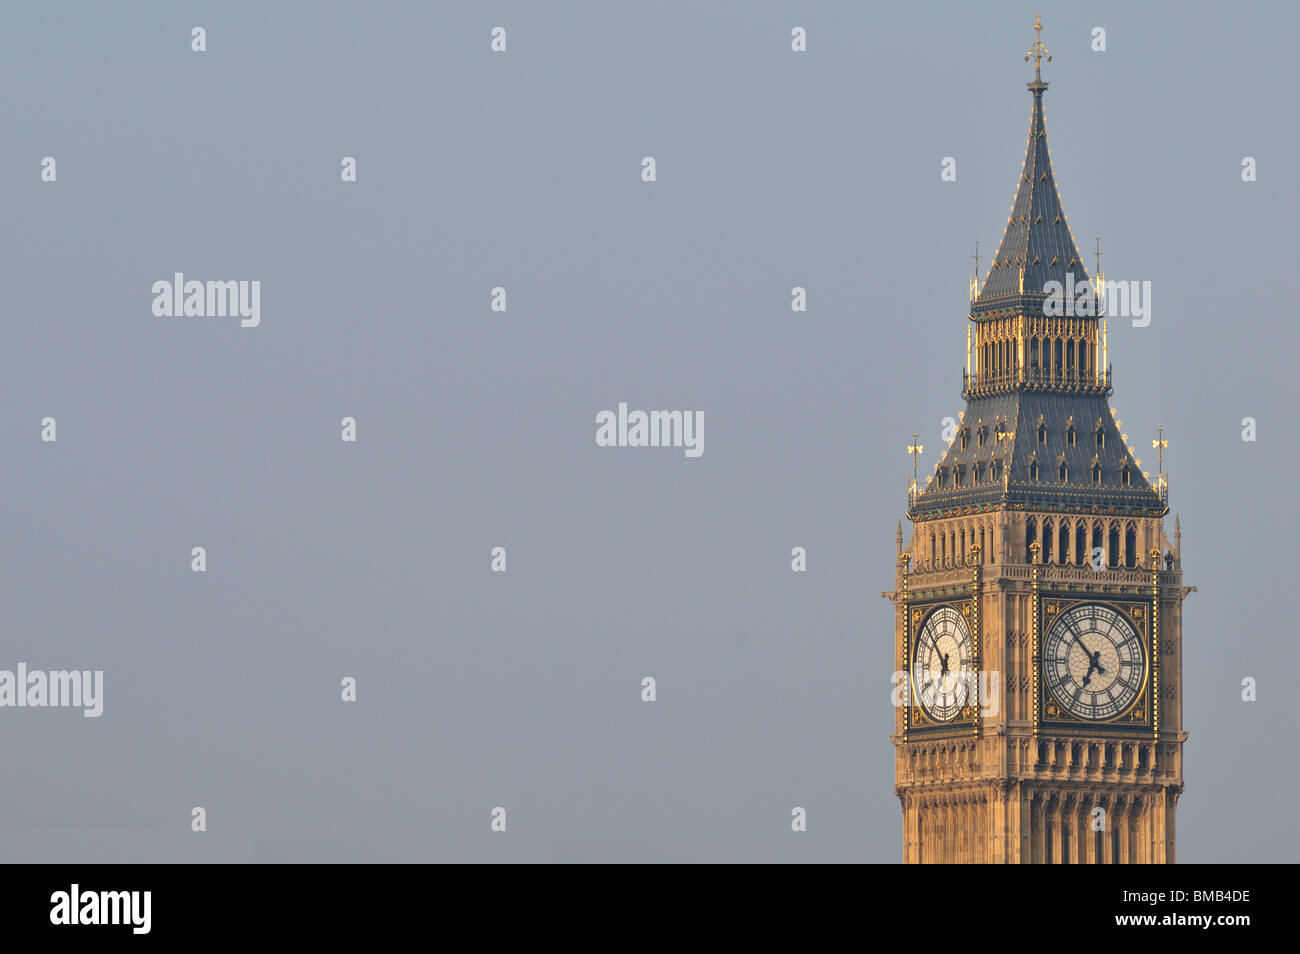 Elizabeth tower, Big Ben clock tower, Houses of Parliament, Palace of Westminster, London, United Kingdom Stock Photo